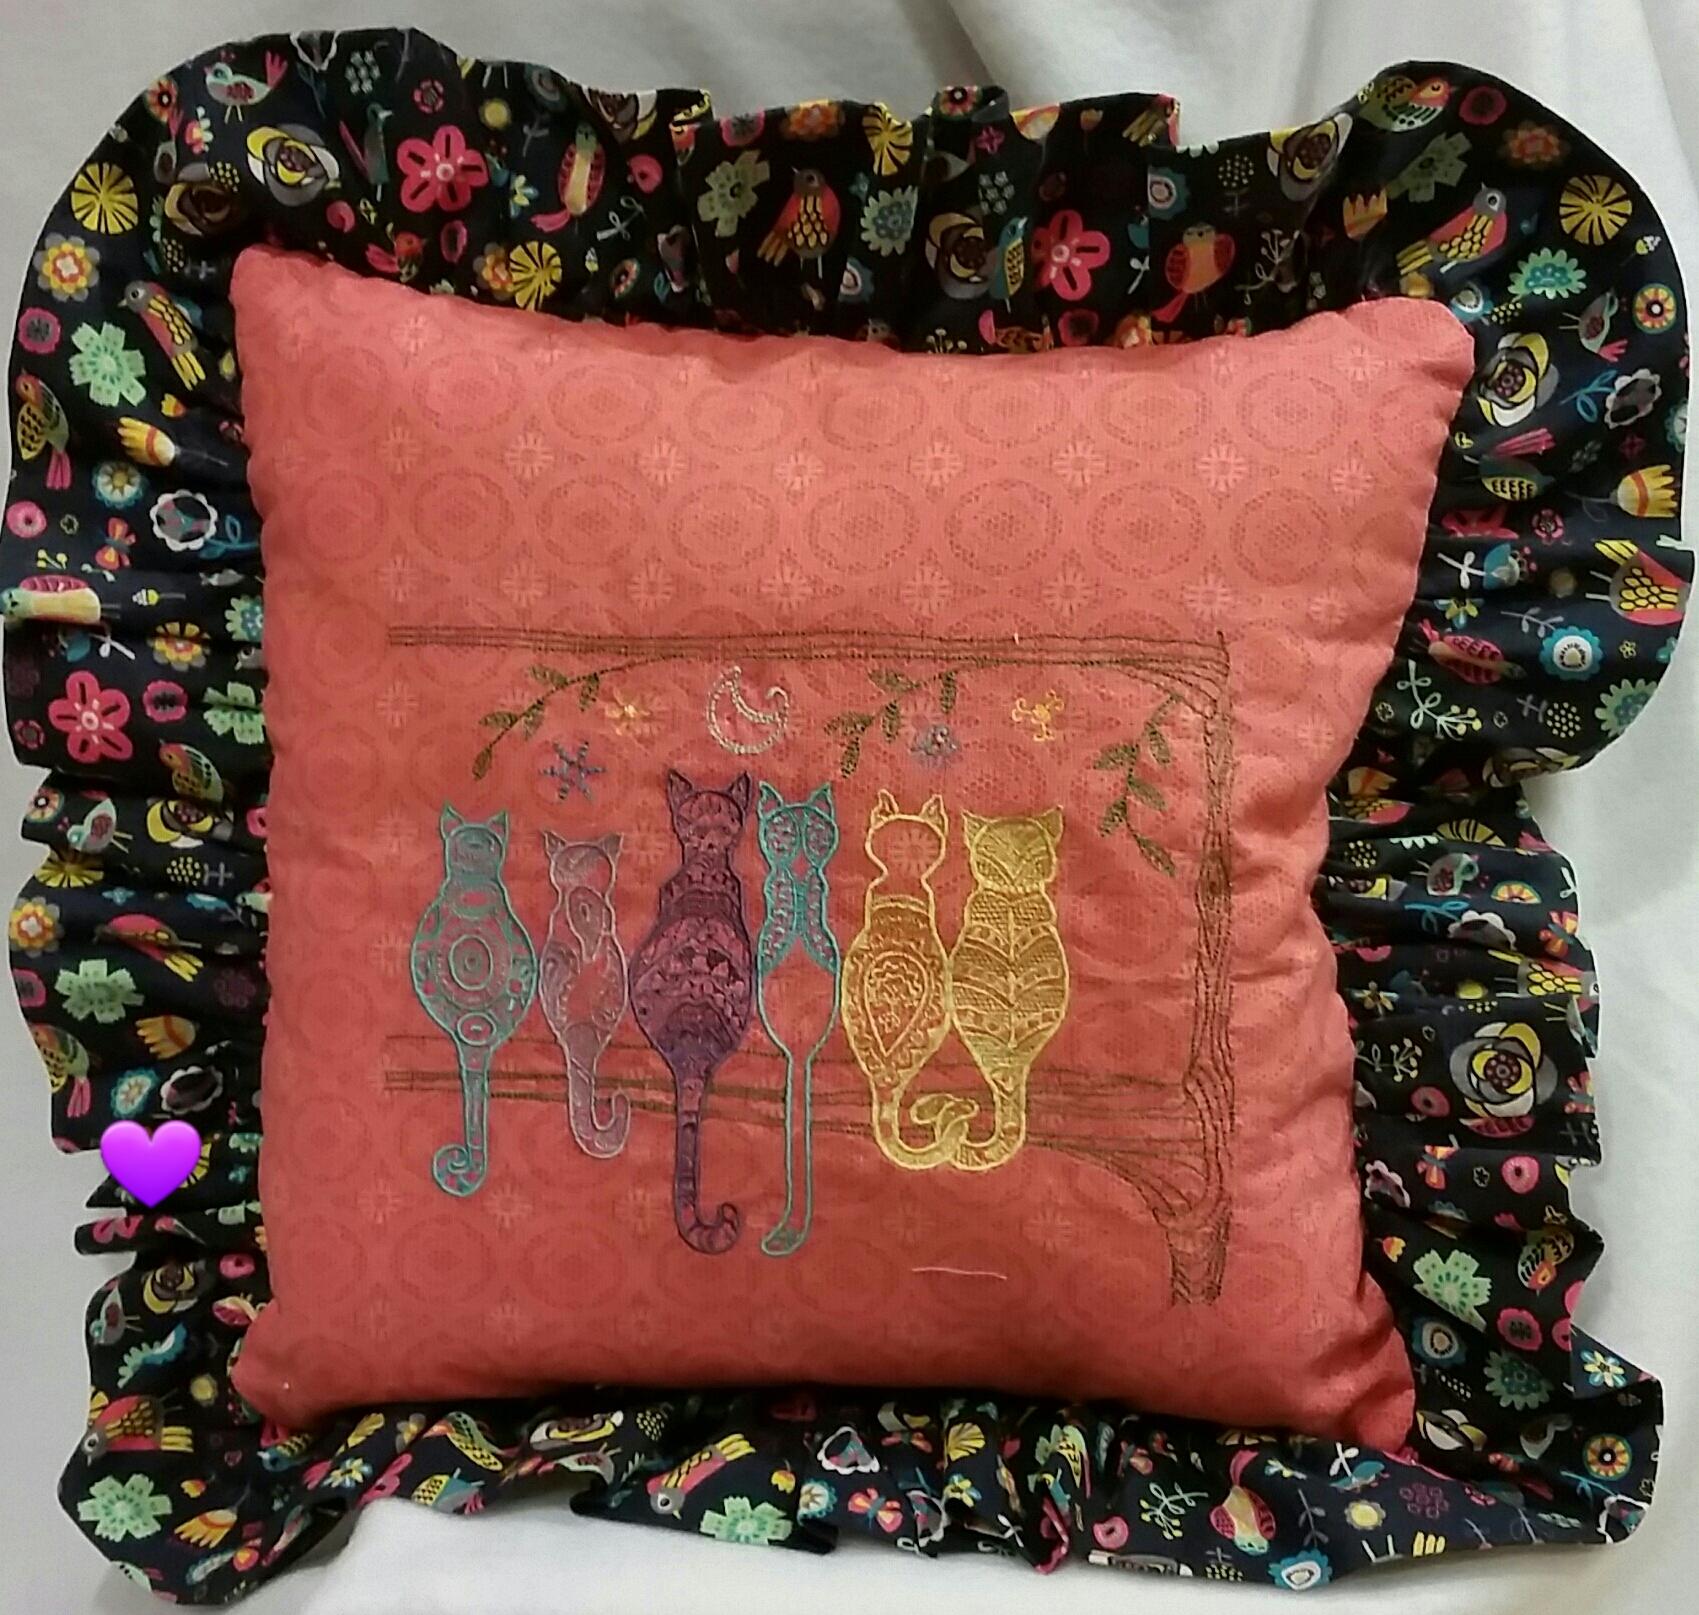 Embroidered cushion with Cats' backs free design